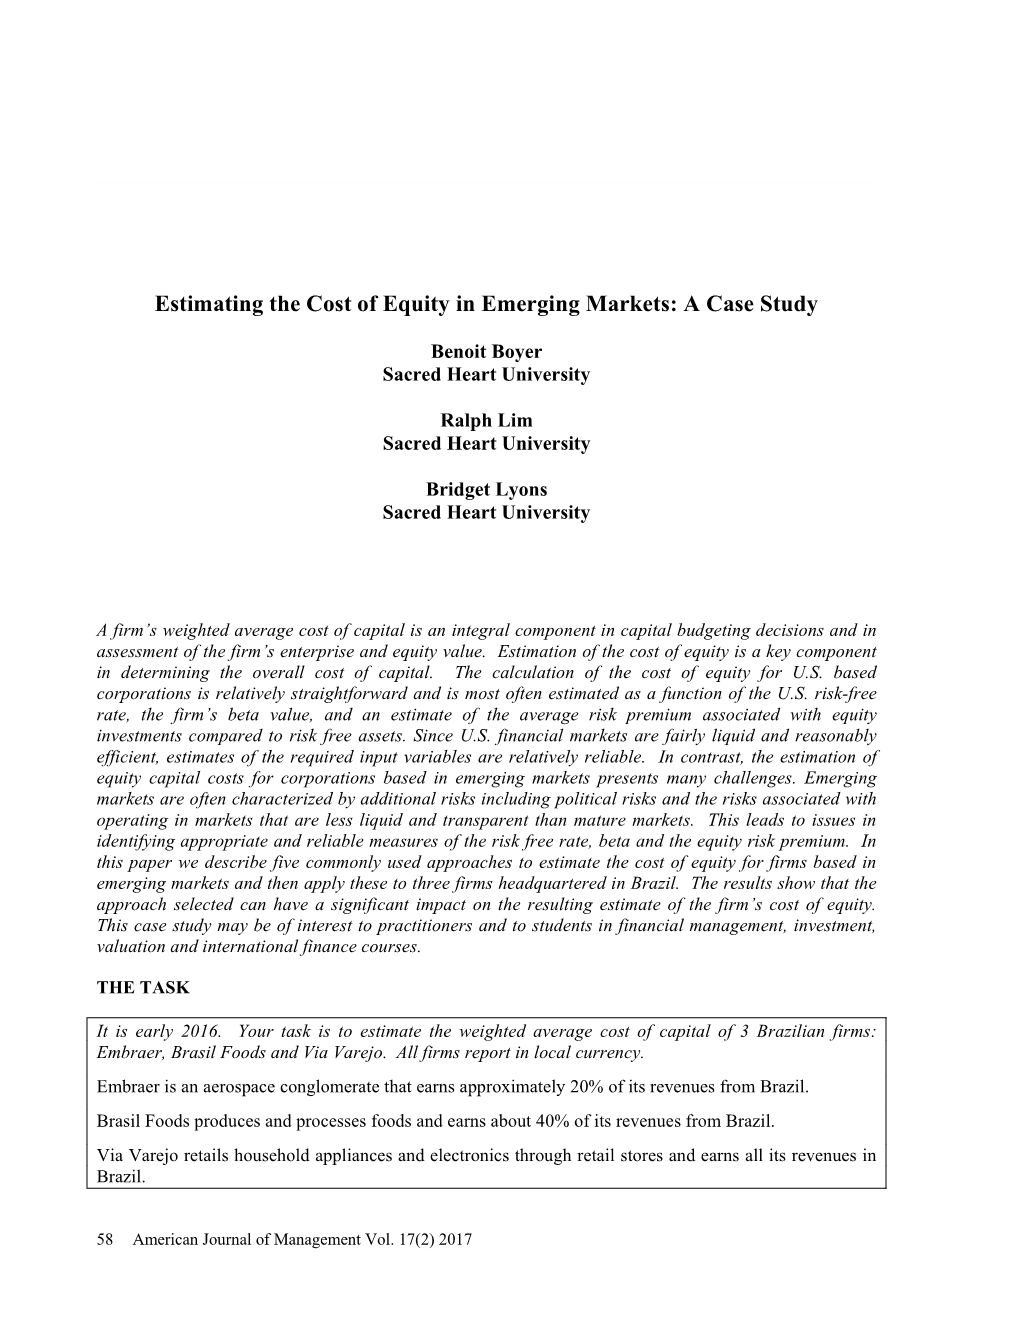 Estimating the Cost of Equity in Emerging Markets: a Case Study